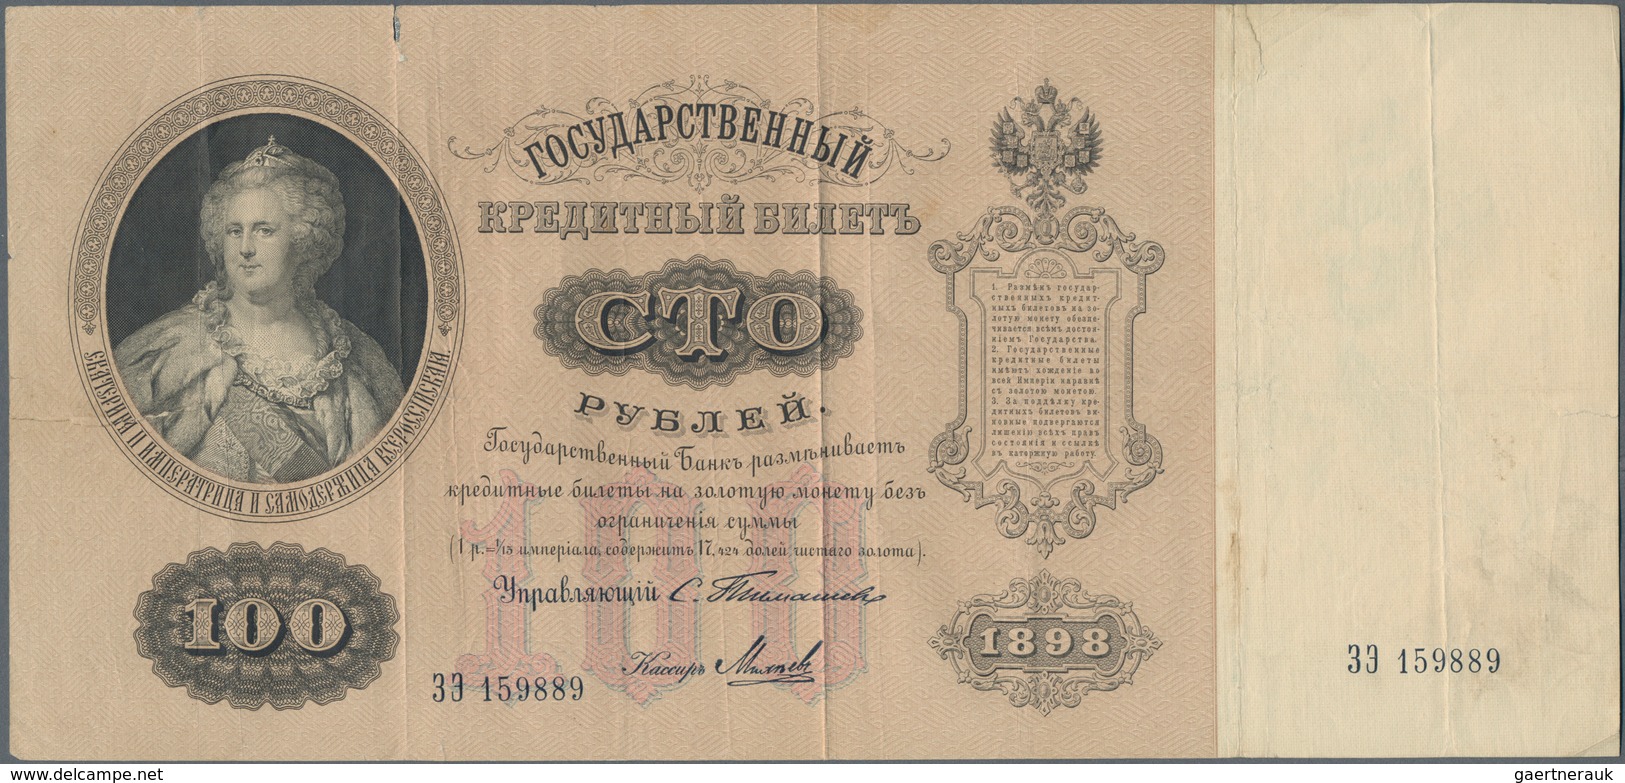 Russia / Russland: 100 Rubles 1898, P.5b With Signatures TIMASHEV/MIKHEIEV, Still Nice With Strong P - Russia